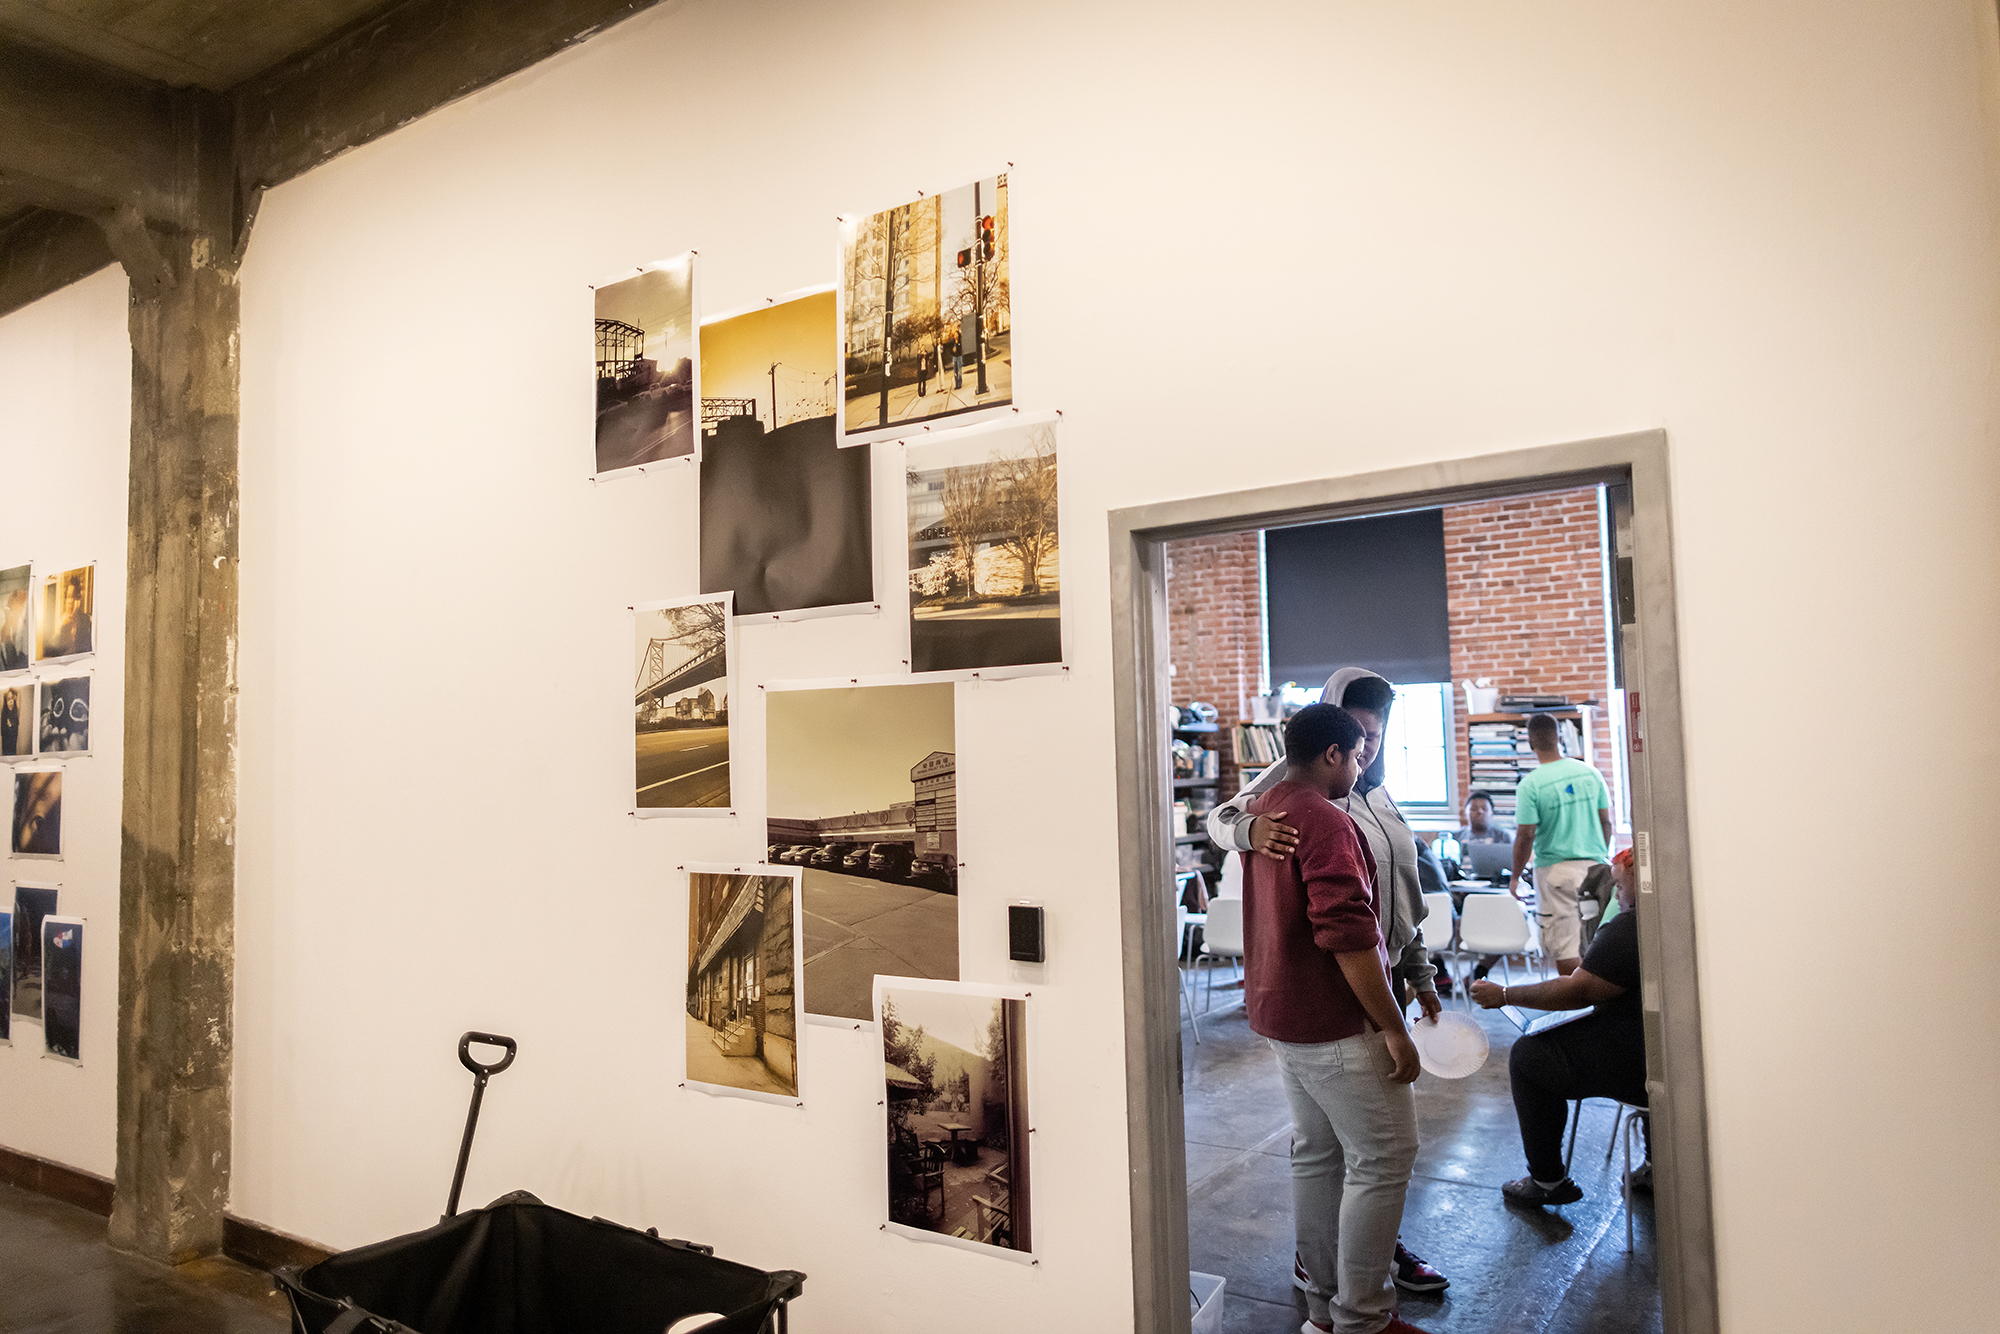 A hallway with mounted, overlapping photographs opens up to a classroom where the Sayre students work